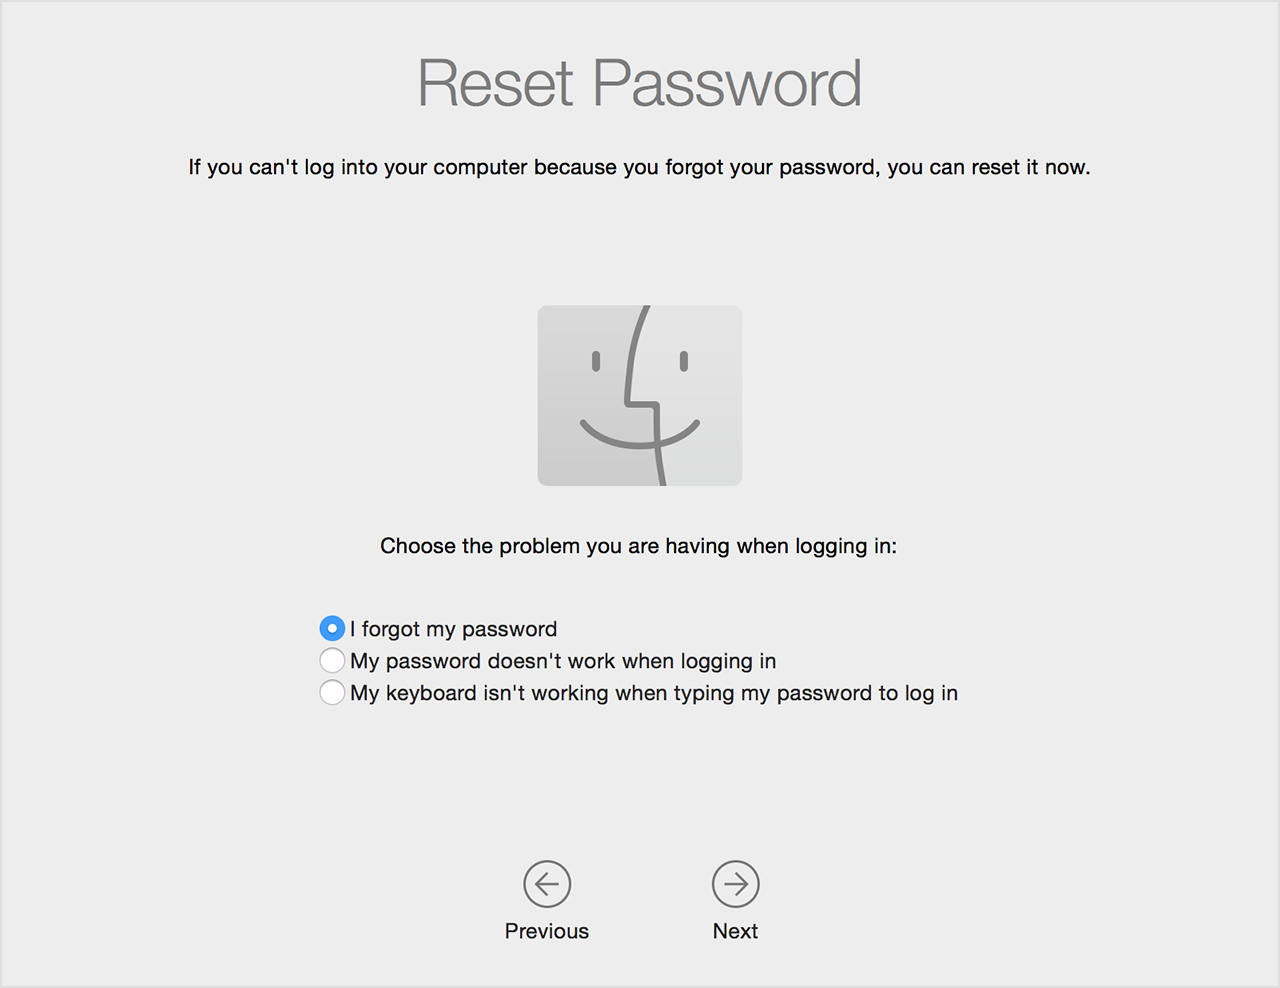 The reset password screen with the option to choose the problem you're having that is resulting in you needing to reset your password